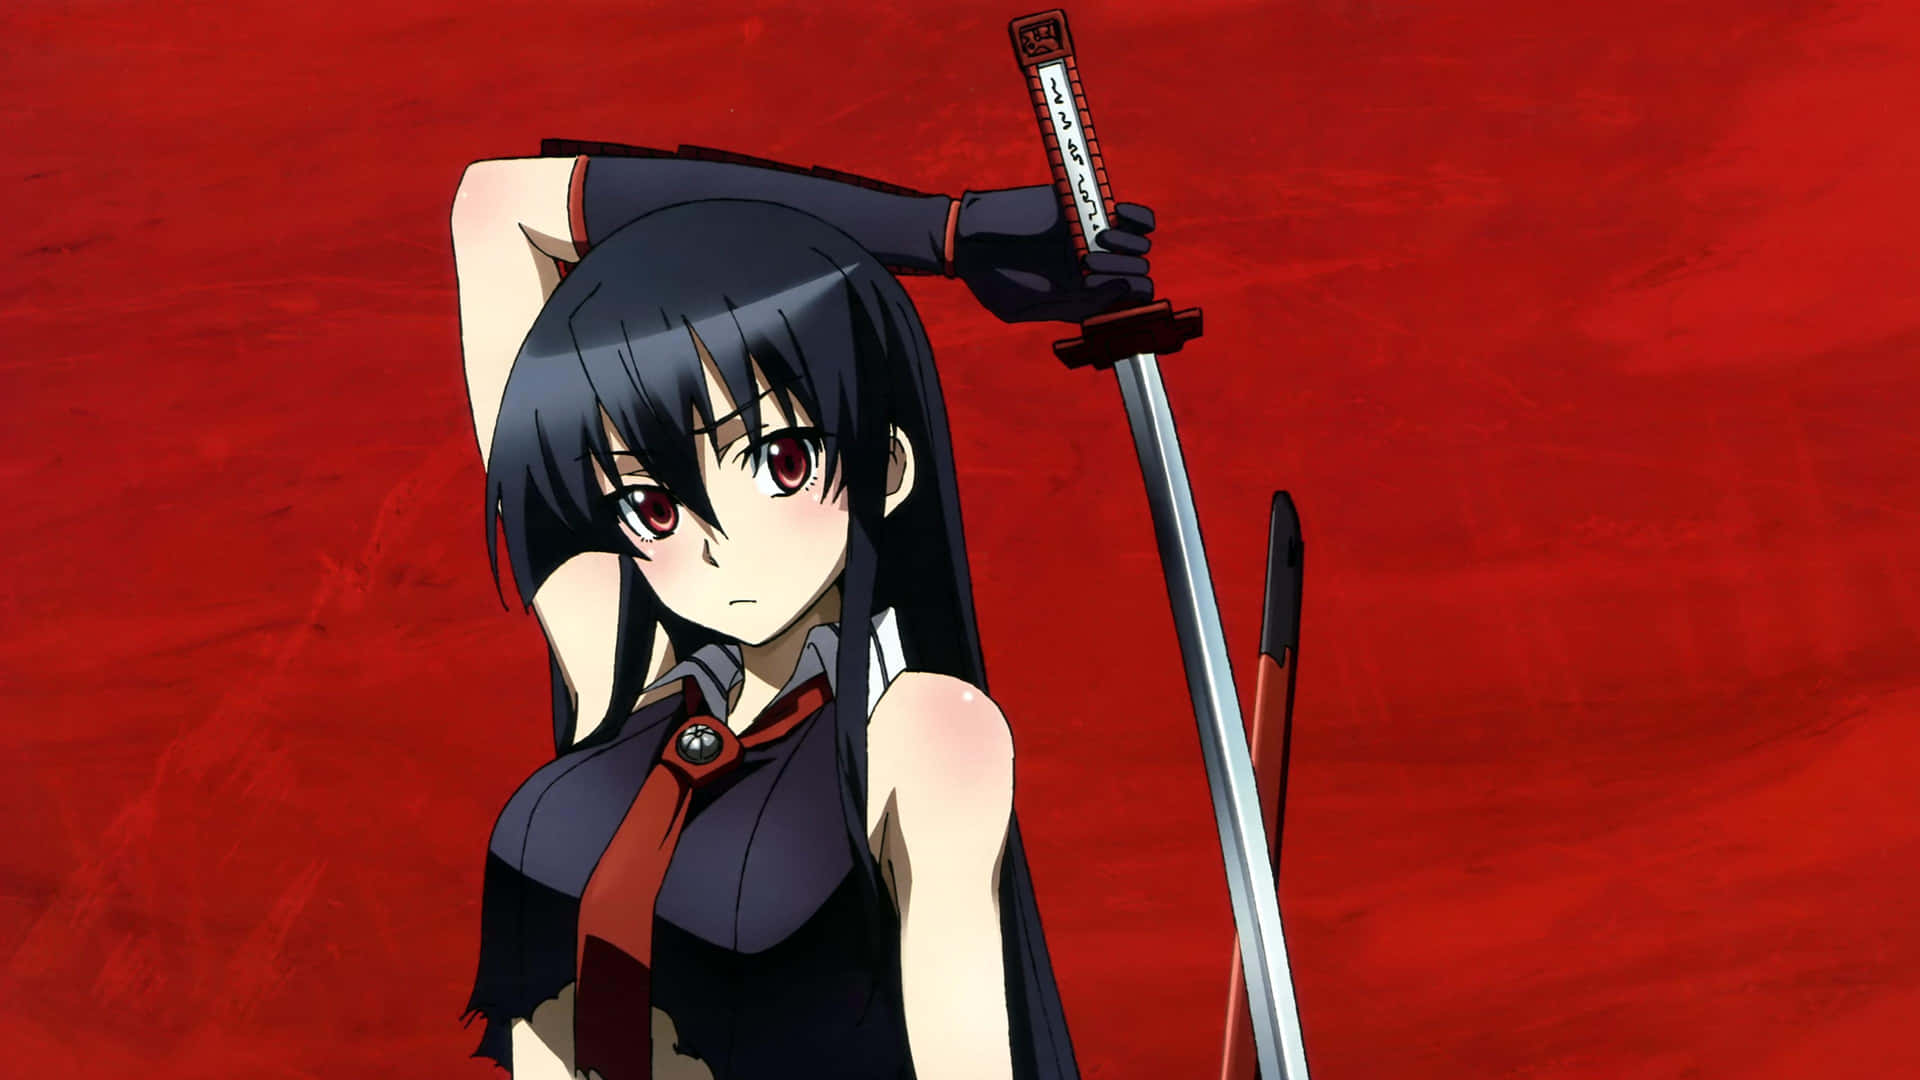 Akame stands firm against her enemies in Akame Ga Kill!